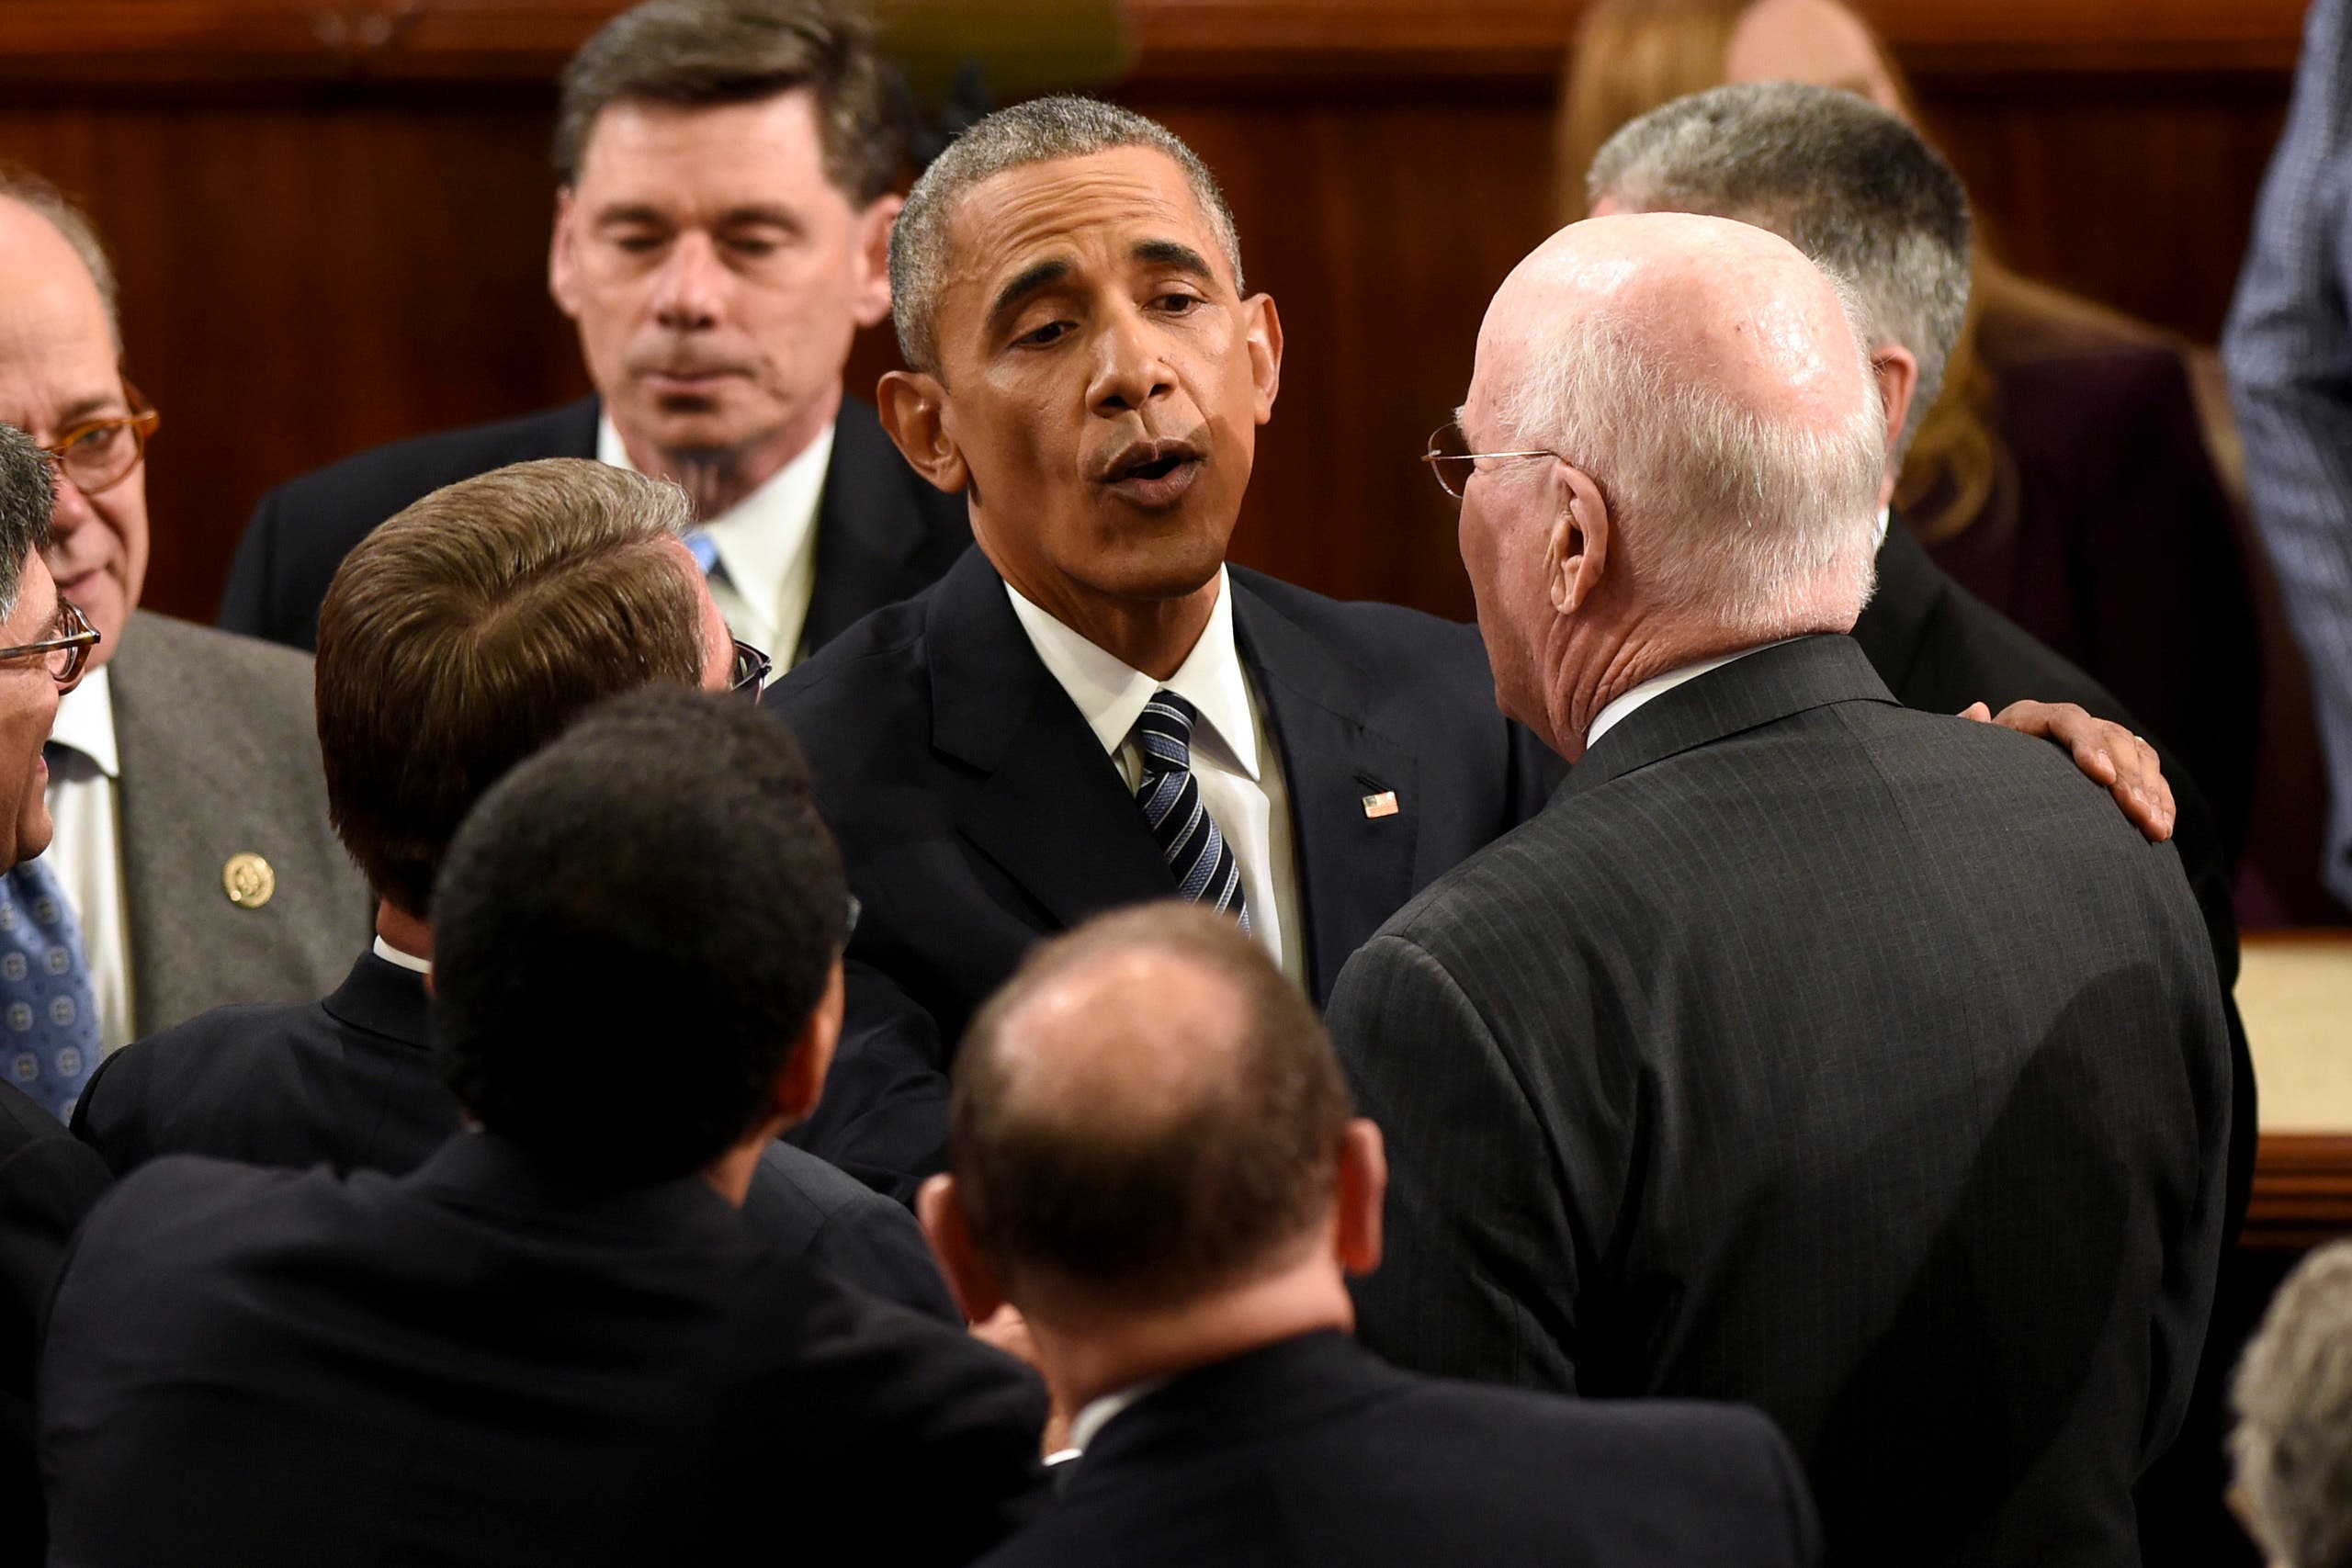 Obama's final State of the Union